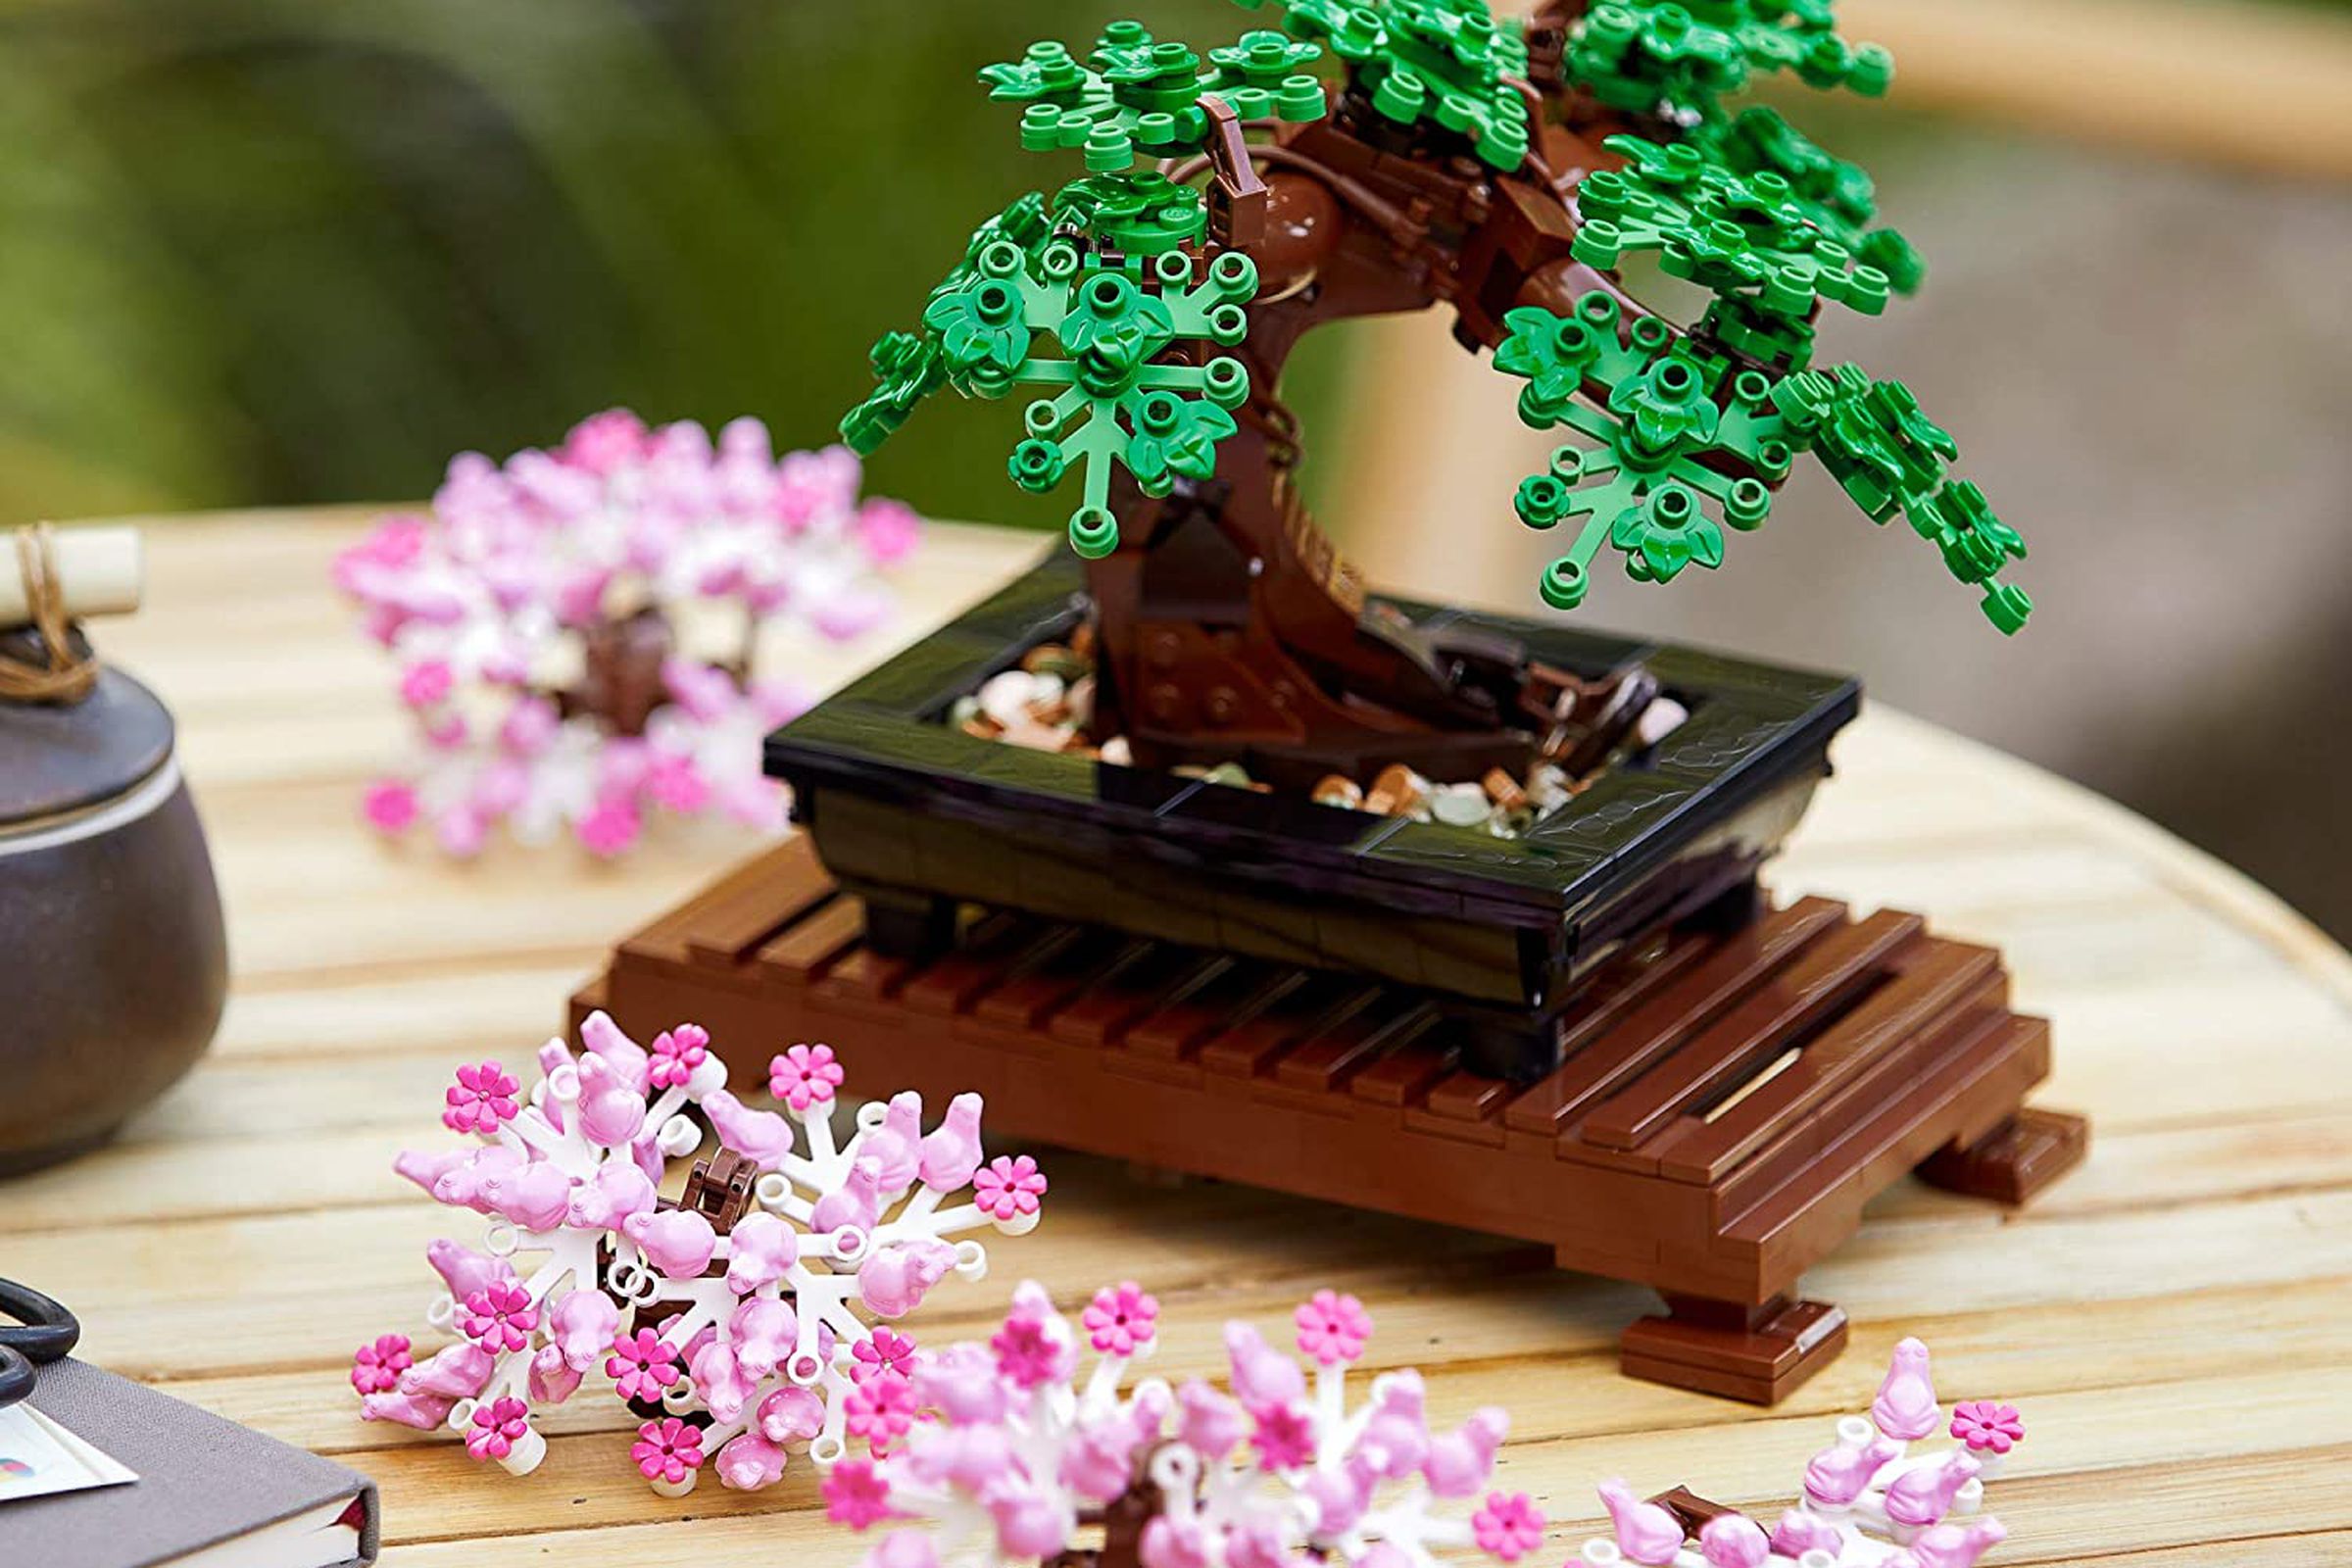 A fully assembled Lego Bonsai Tree set resting on a table.